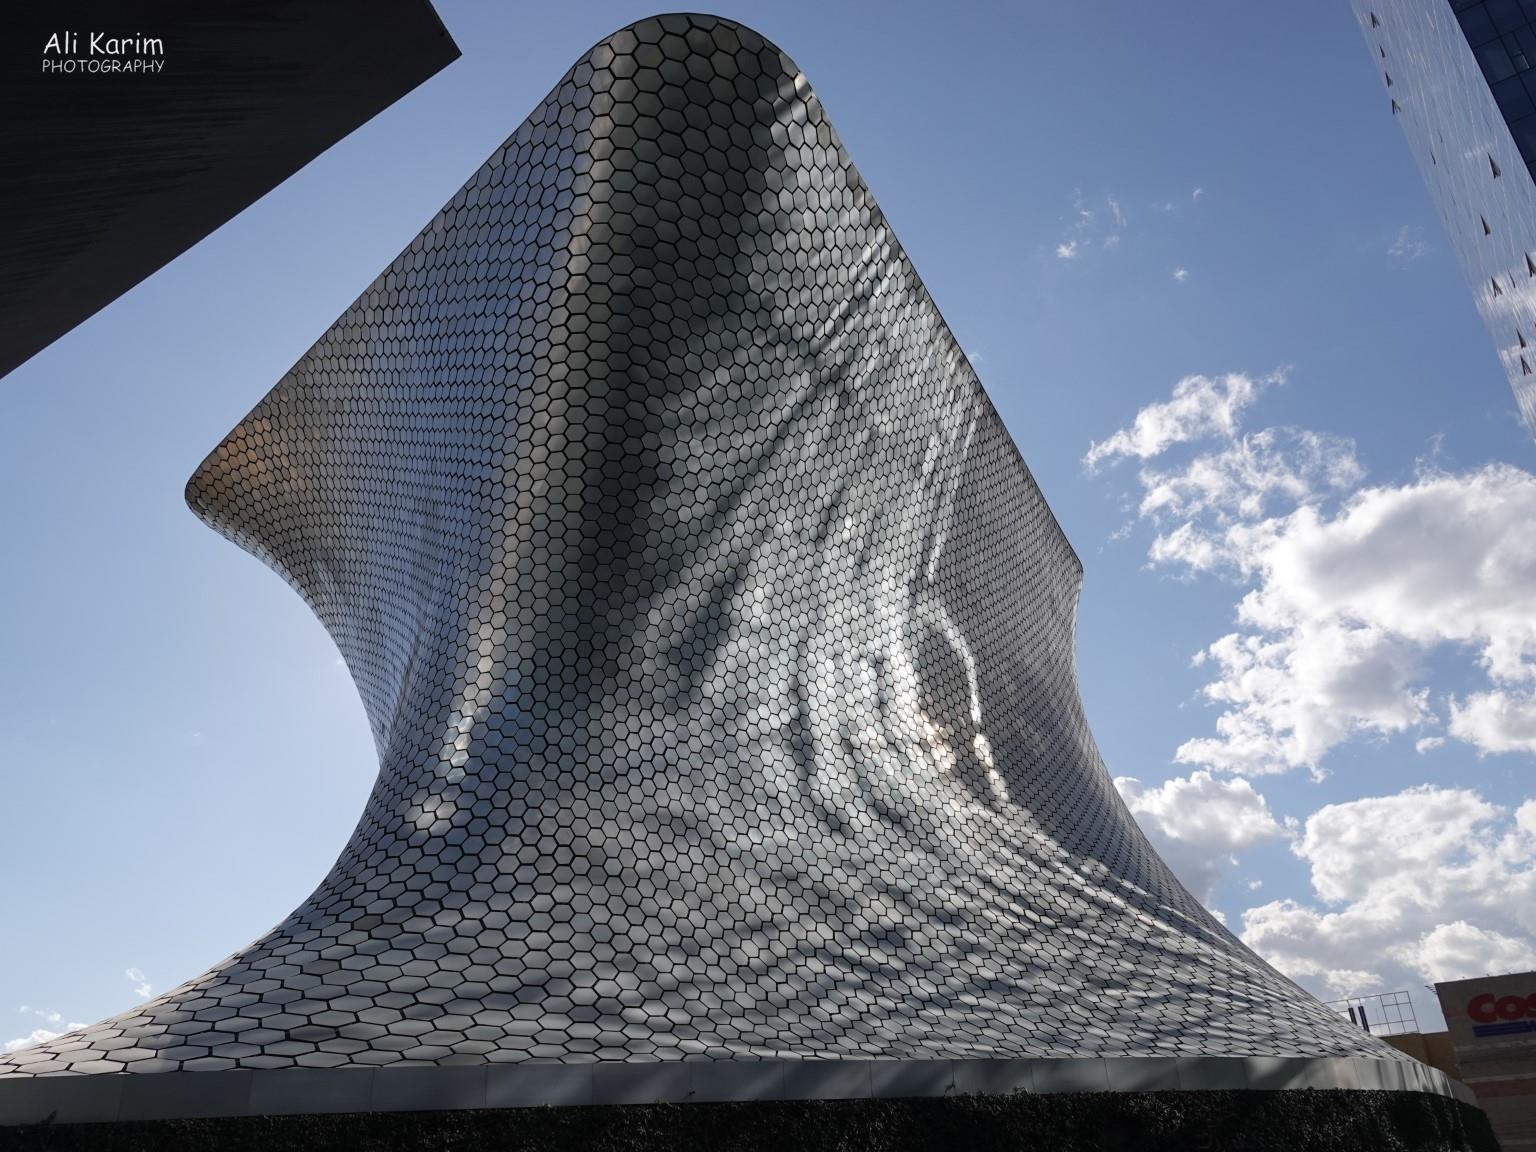 Mexico City, Mexico, Dec 2019, The Soumaya Museum in the city center; interesting building design. It had one floor on Khalil Gibran, the Lebanese poet/writer, whose museum we had visited during our trip to Lebanon